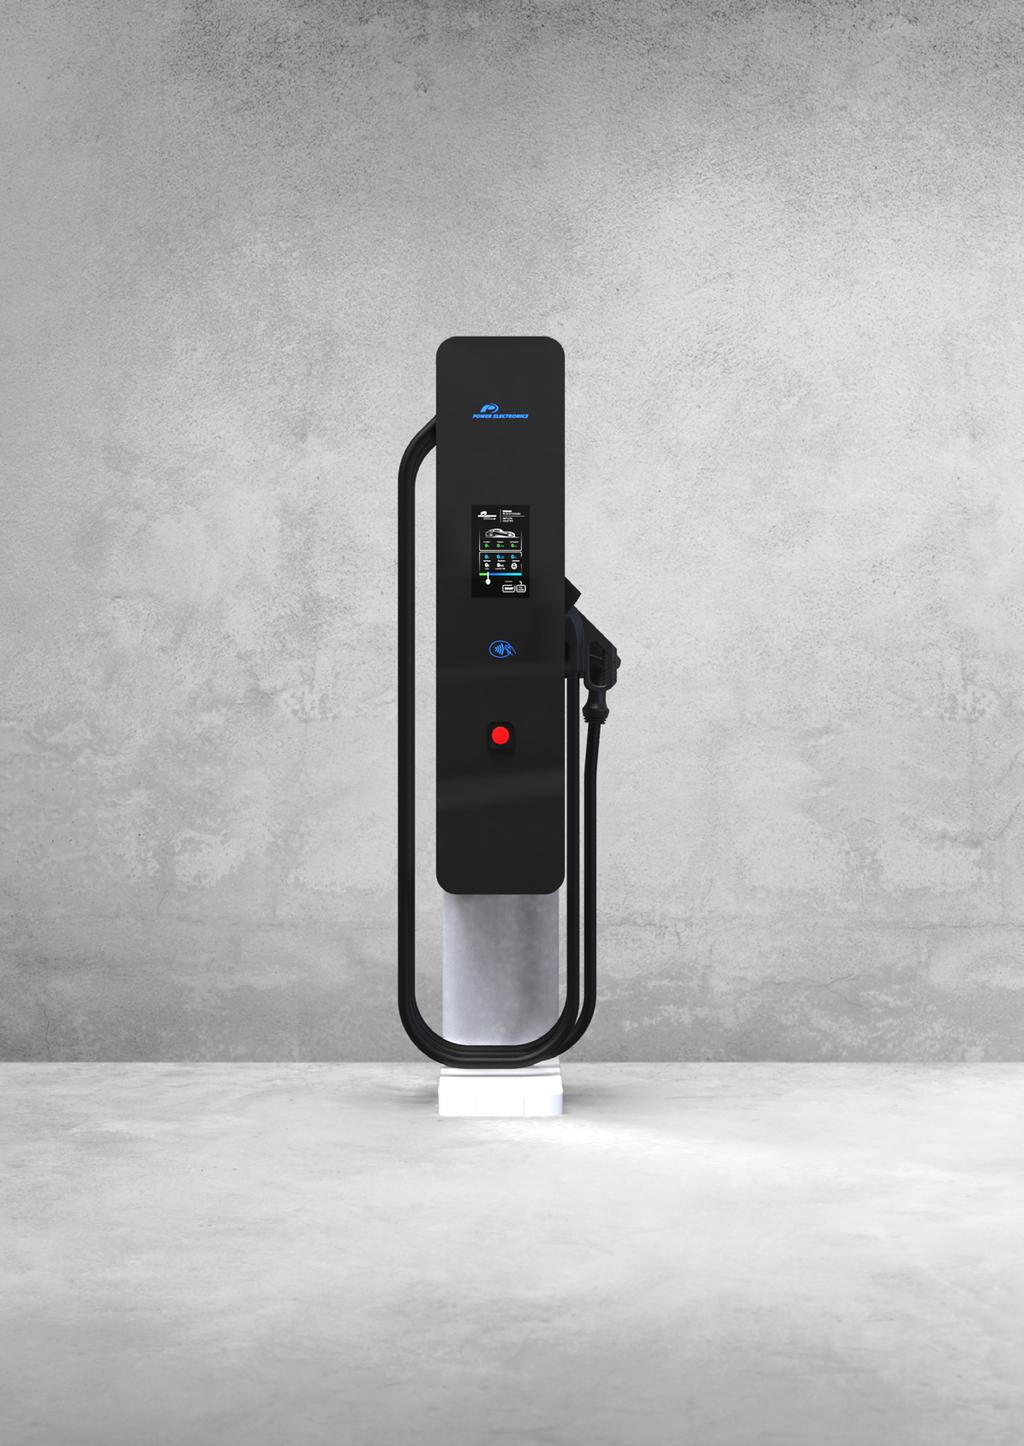 17 NUBE STATION FAST AND ULTRA FAST CHARGING CLOSE TO CAR OEMS MULTI-STANDARD CONNECTORS SMART POWER BALANCE HIGH EFFICIENCY TURN-KEY SOLUTION